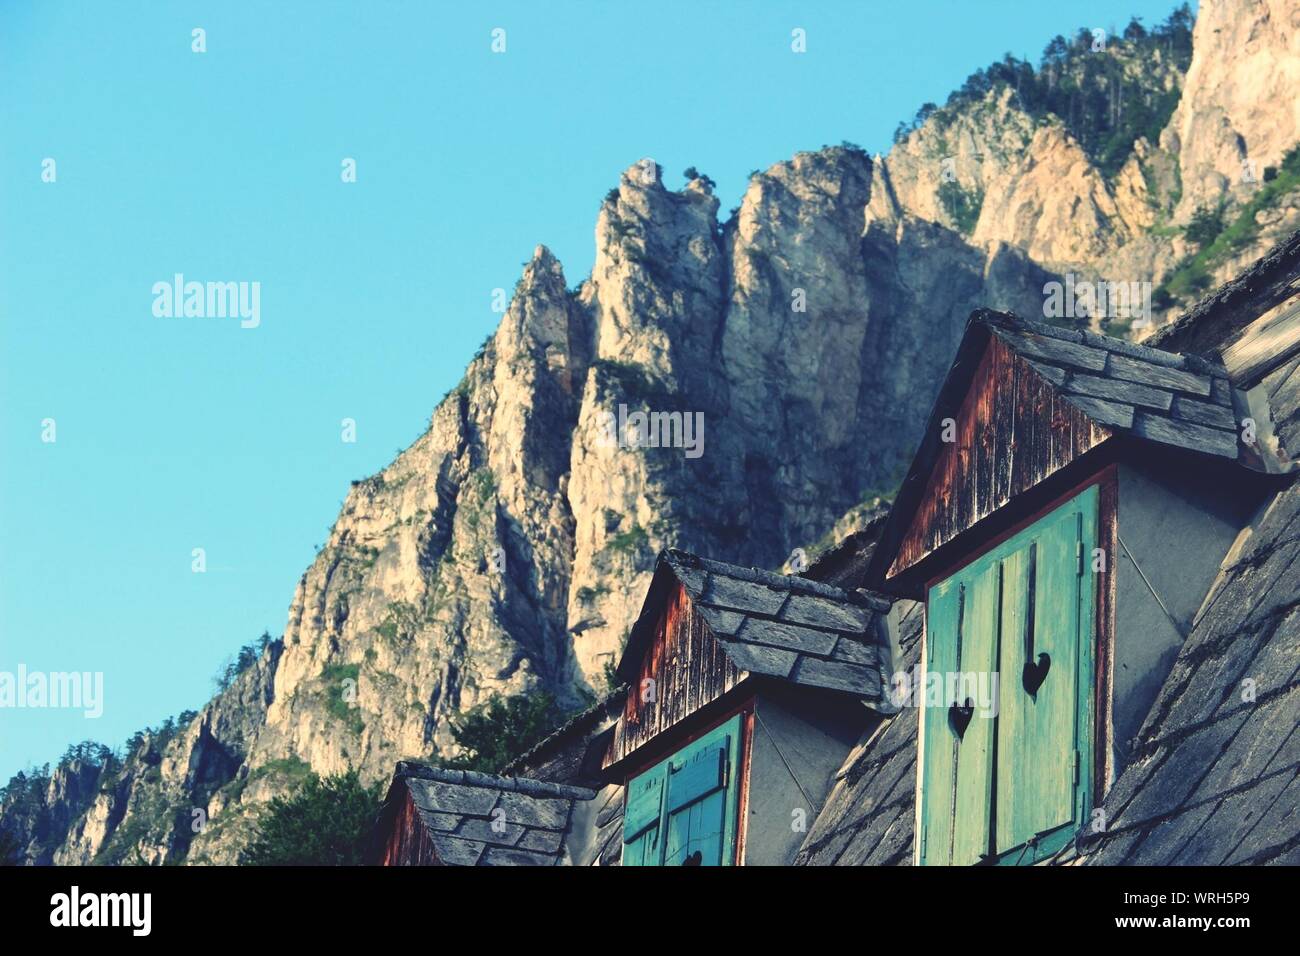 Exterior Of House With Dormer Windows Against Mountains Stock Photo